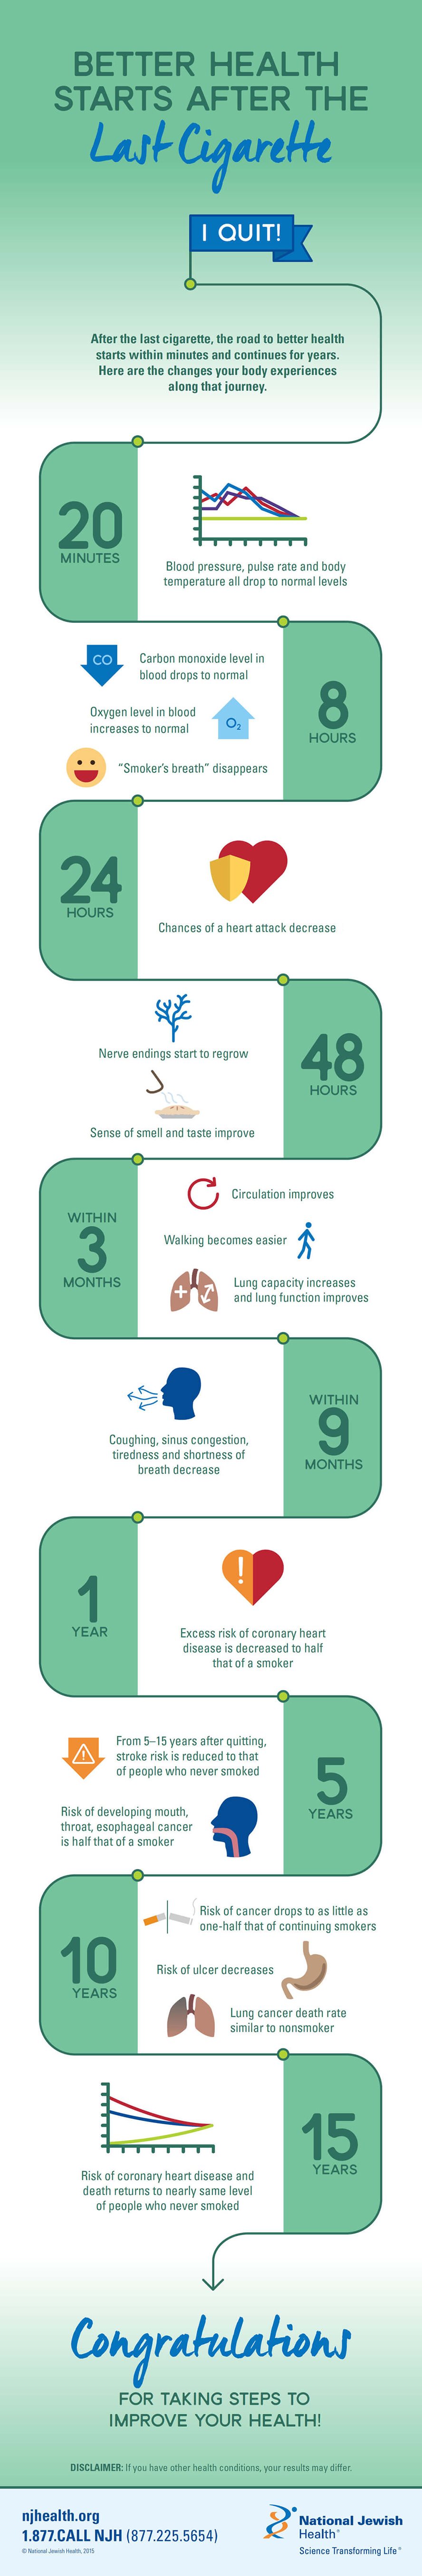 Better Health after Quitting Smoking - infographic